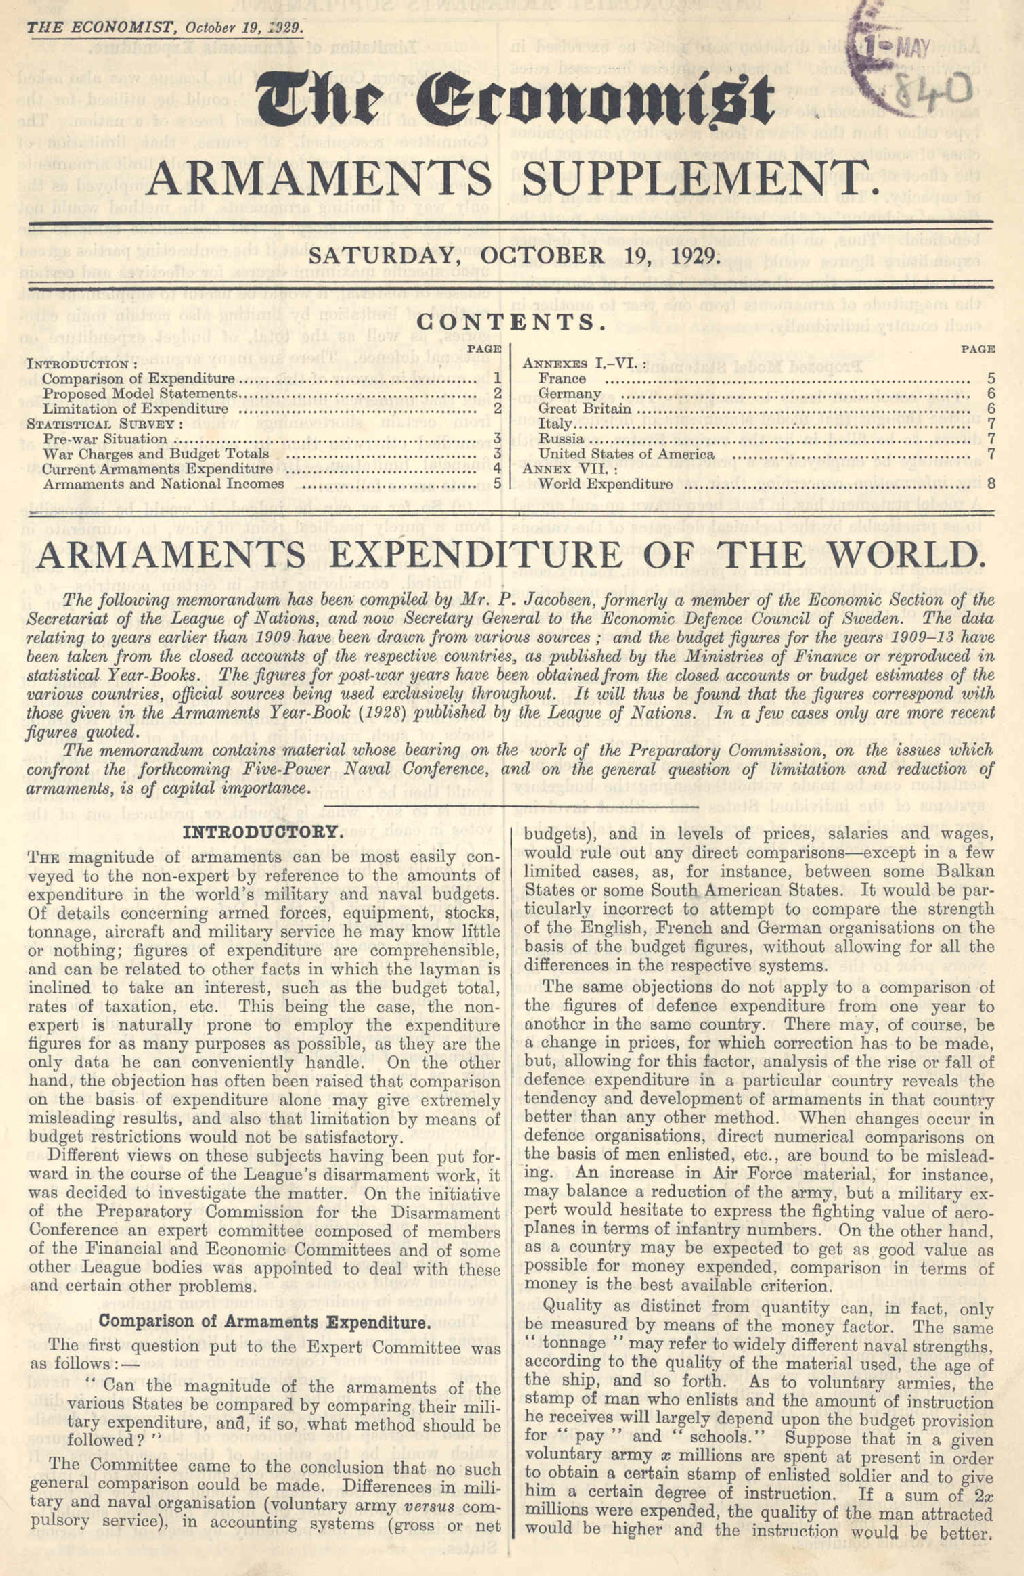 'Armaments expenditure of the world', 19 October 1929